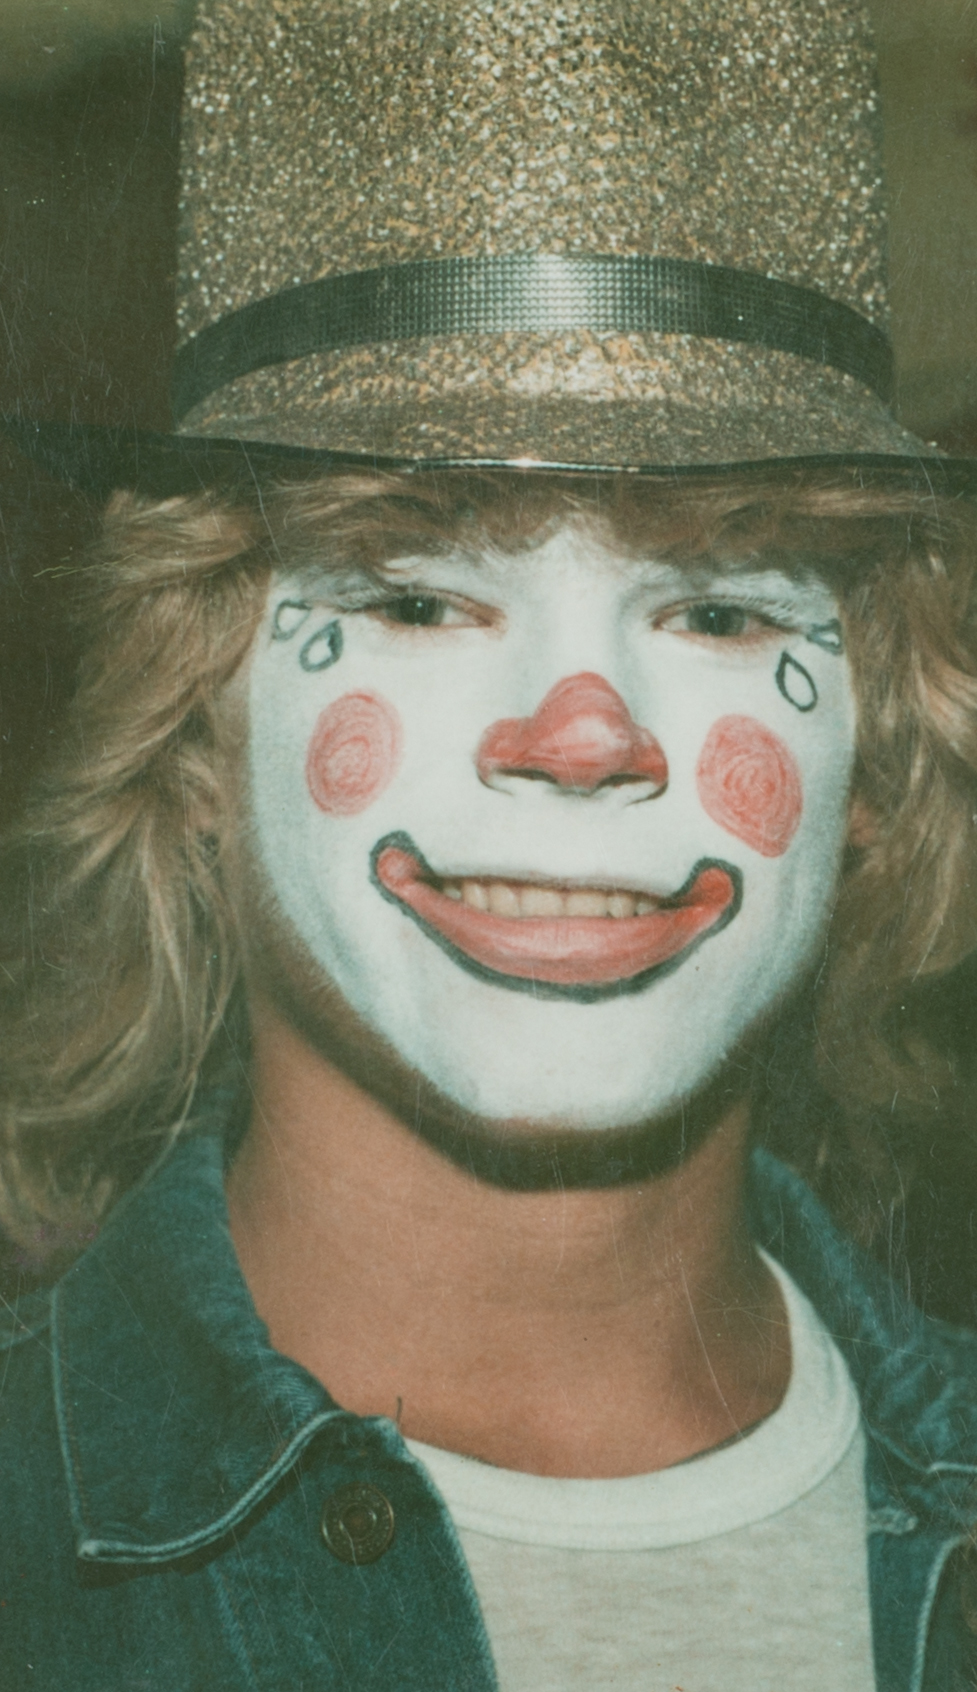 Mike Holmes dressed up as a clown for Halloween